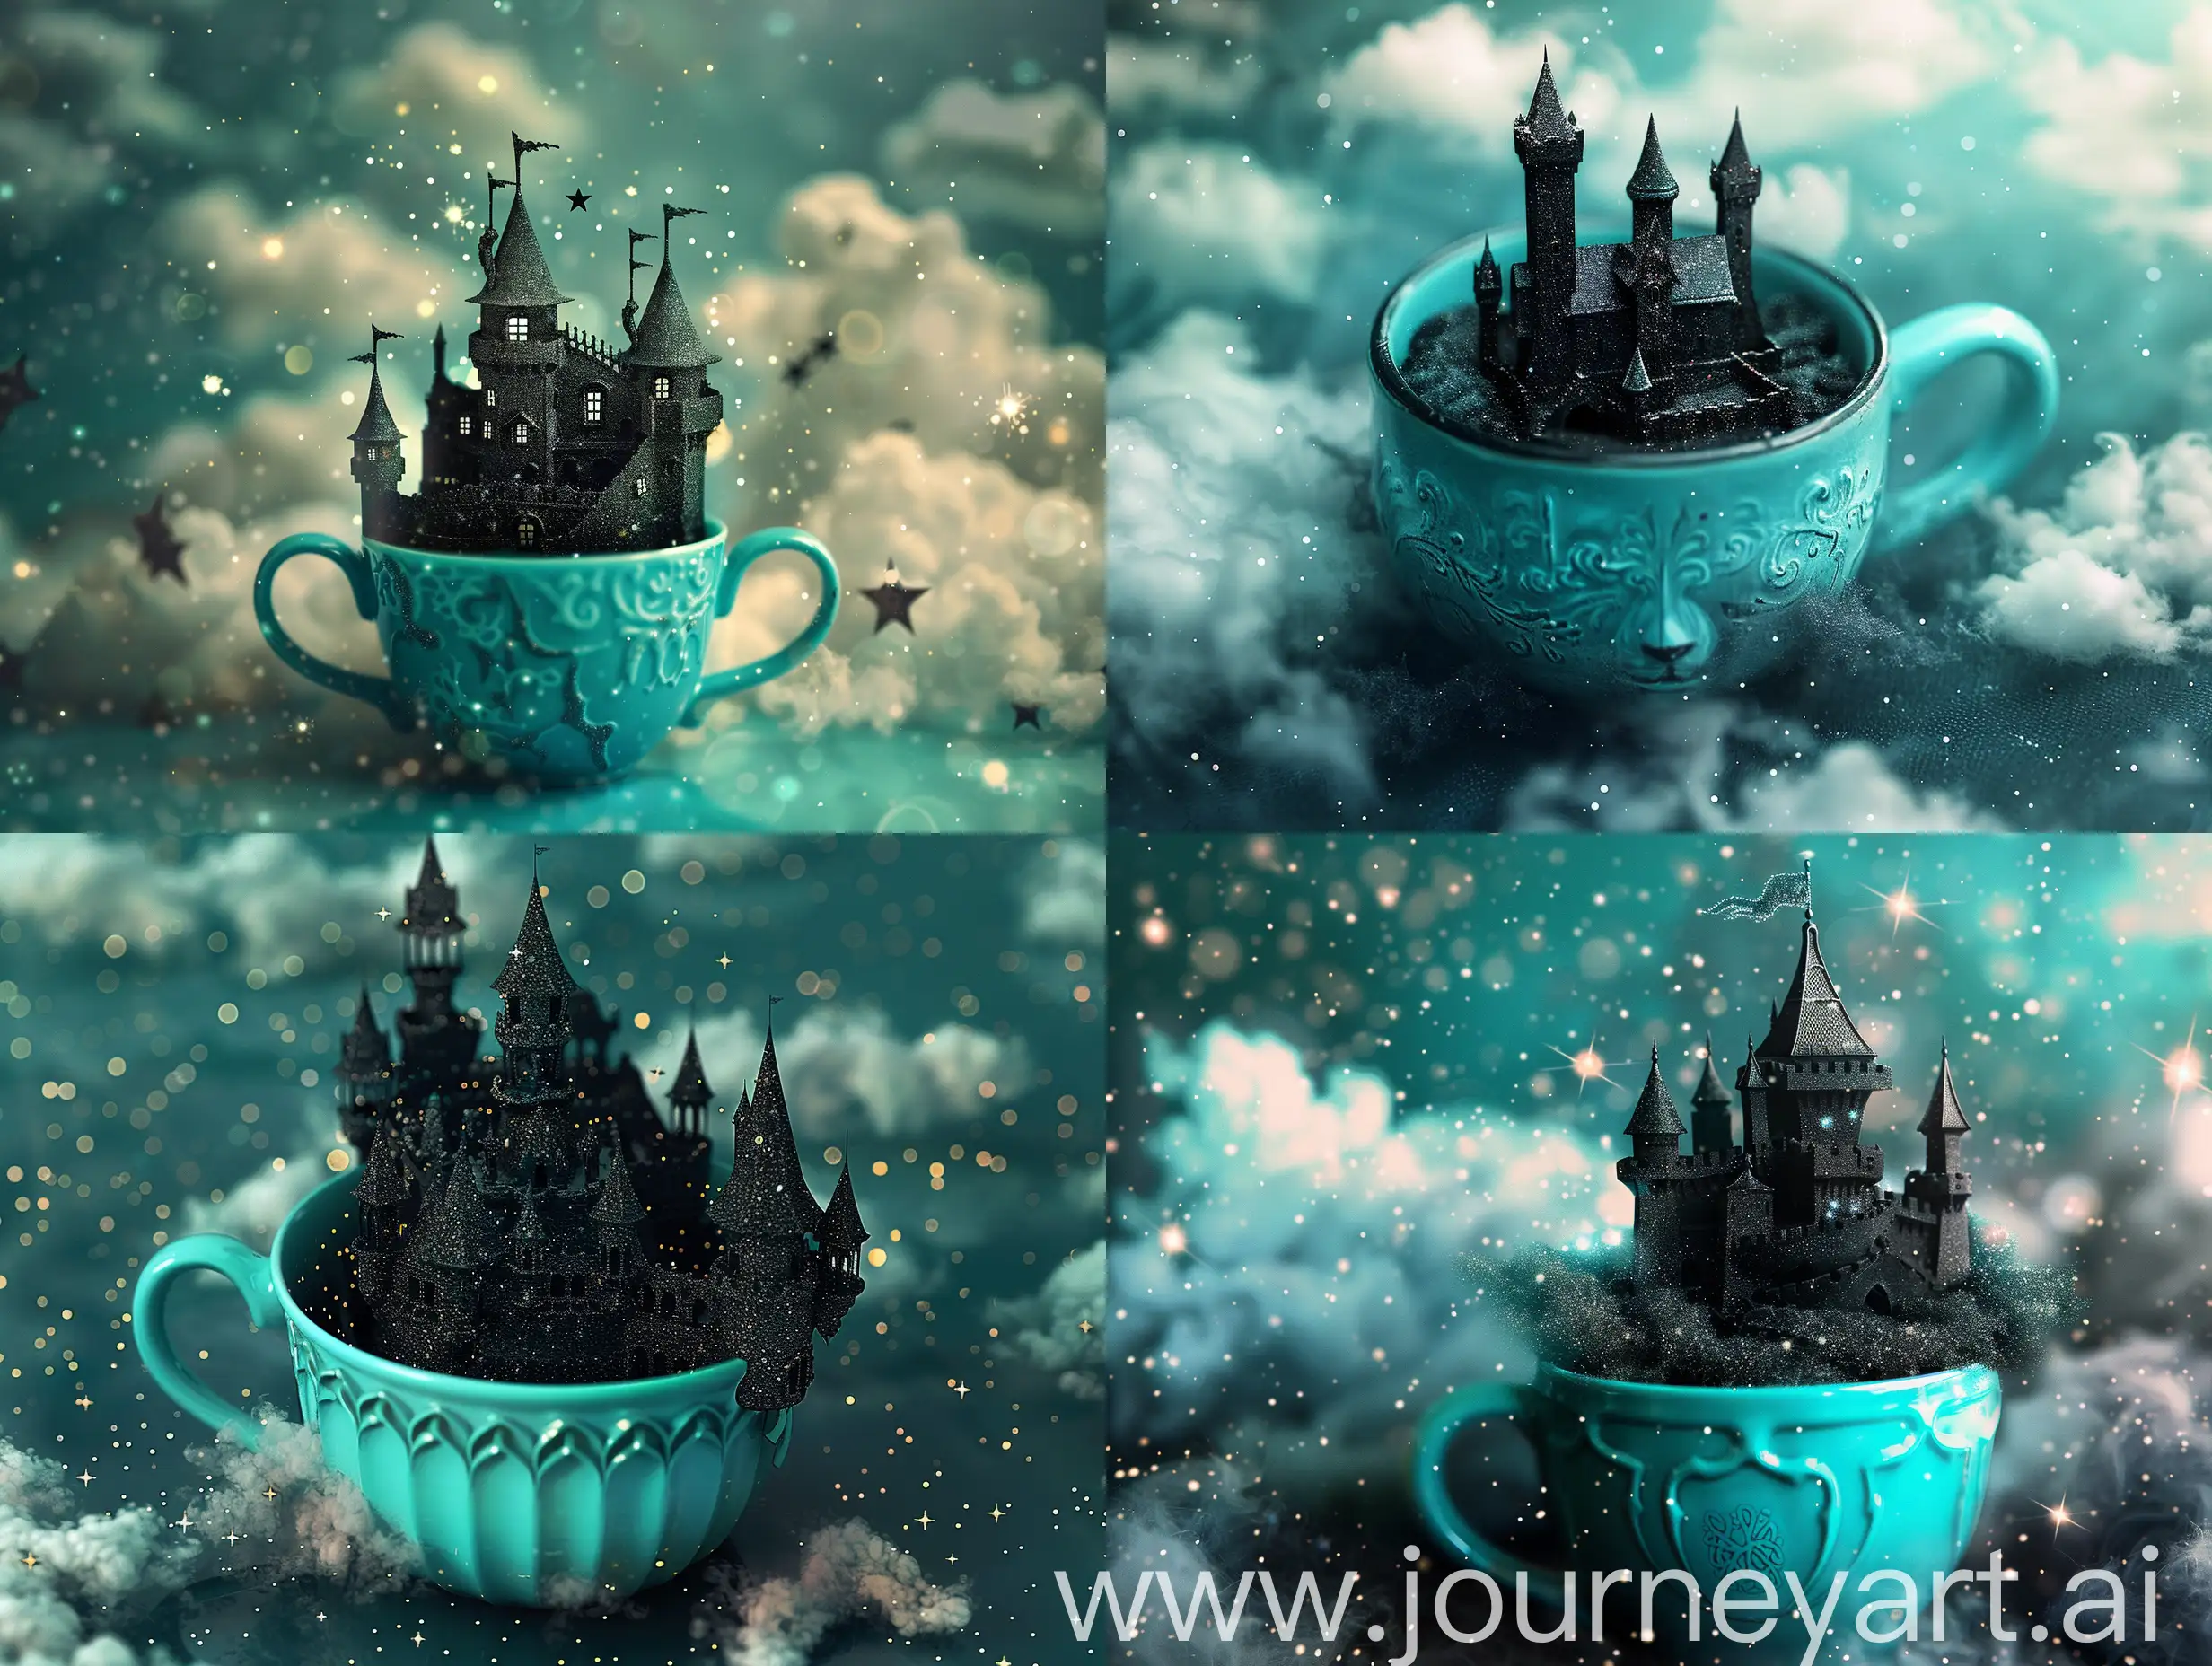 Enchanting-Black-Castle-in-Turquoise-Cup-Magical-Fairy-Tale-Scene